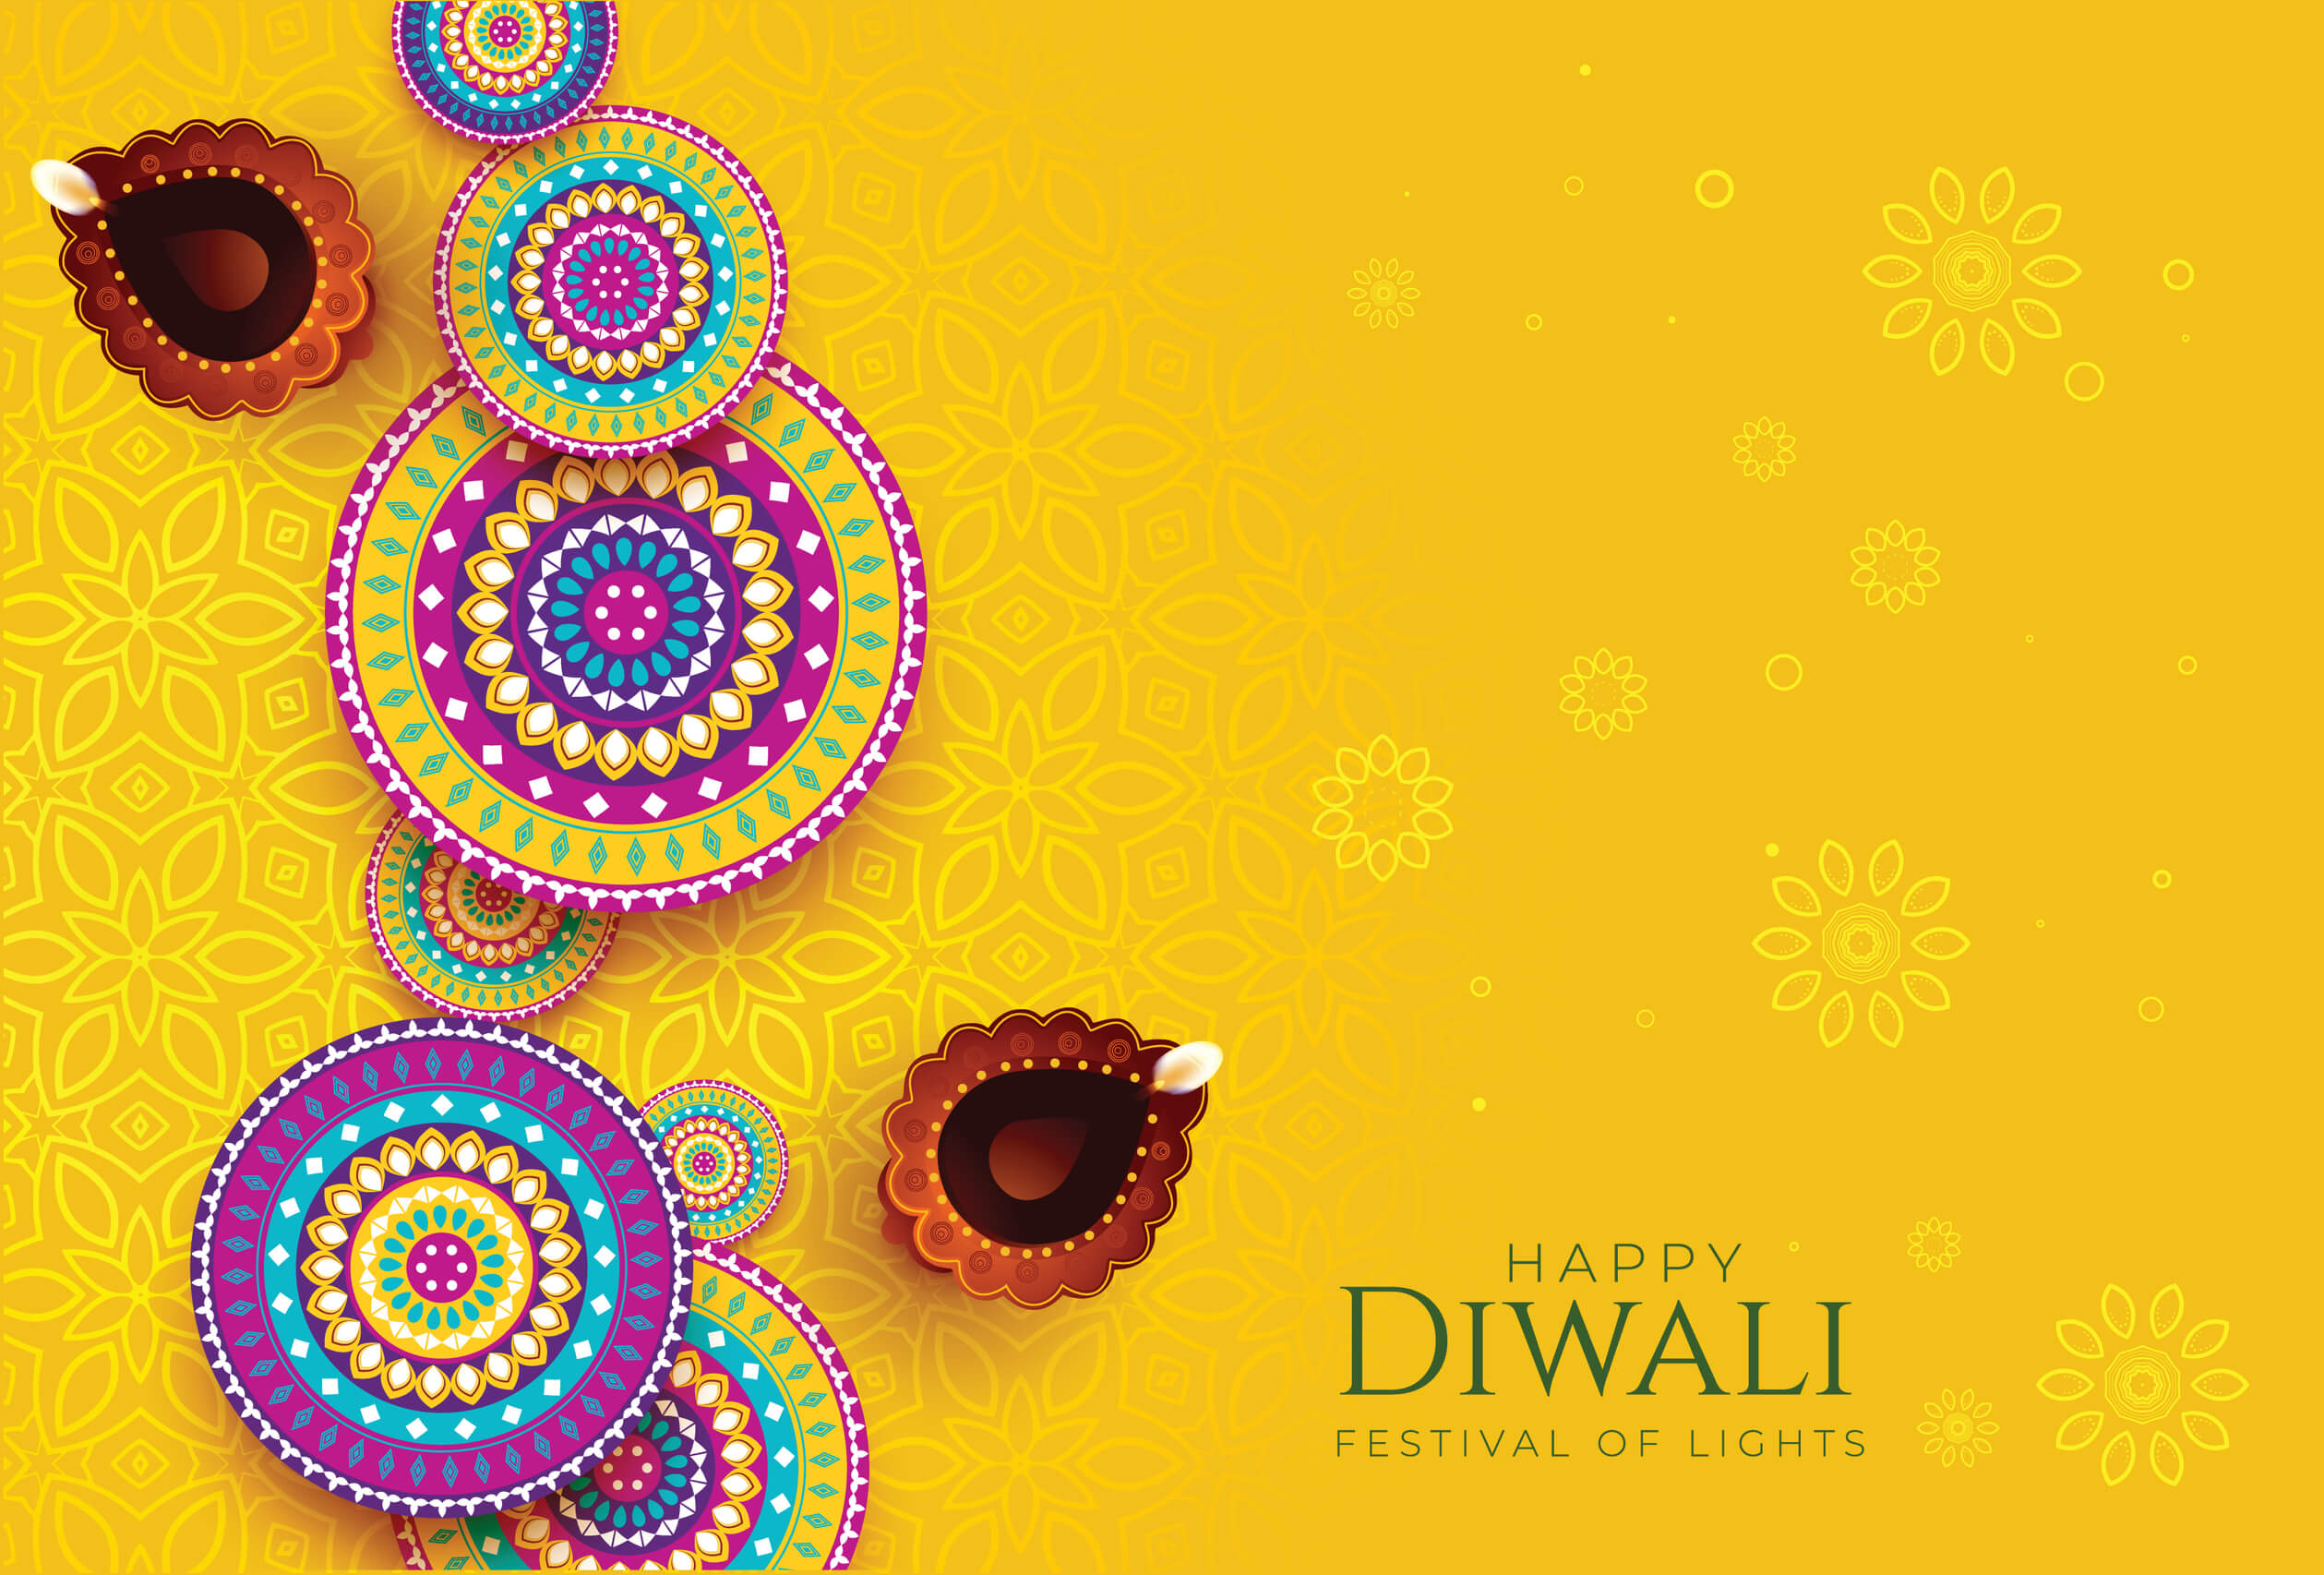 Online Diwali Shopping Tips That Can Make Your Life Earlier